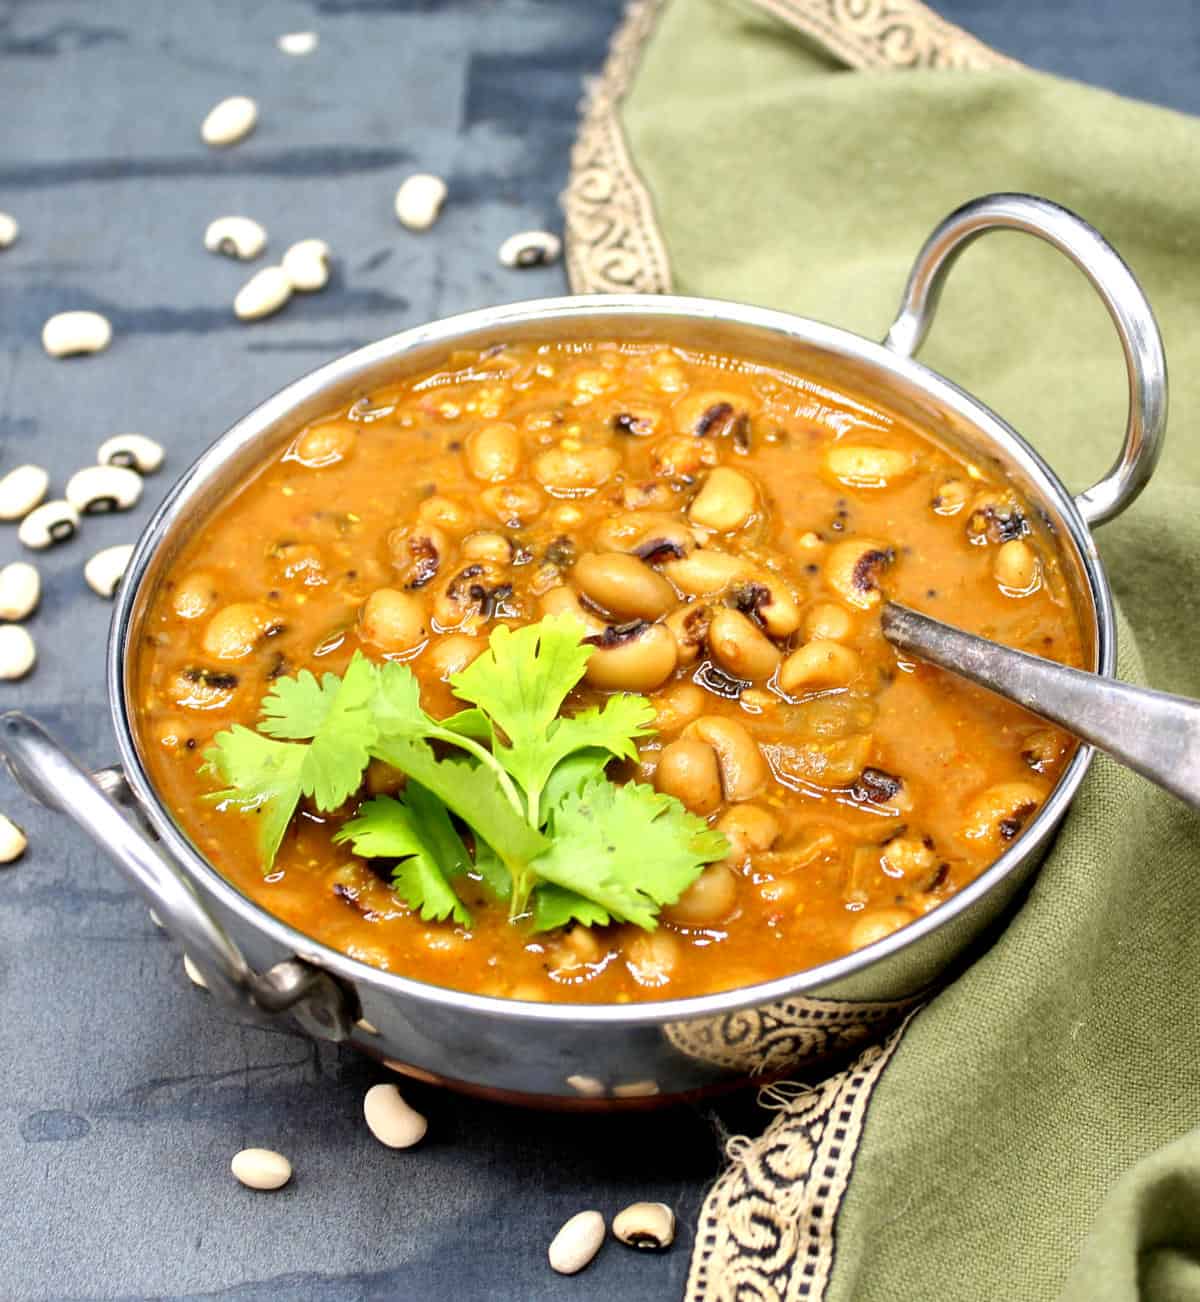 Black eyed peas curry in karahi with cilantro garnish and beans strewn around.